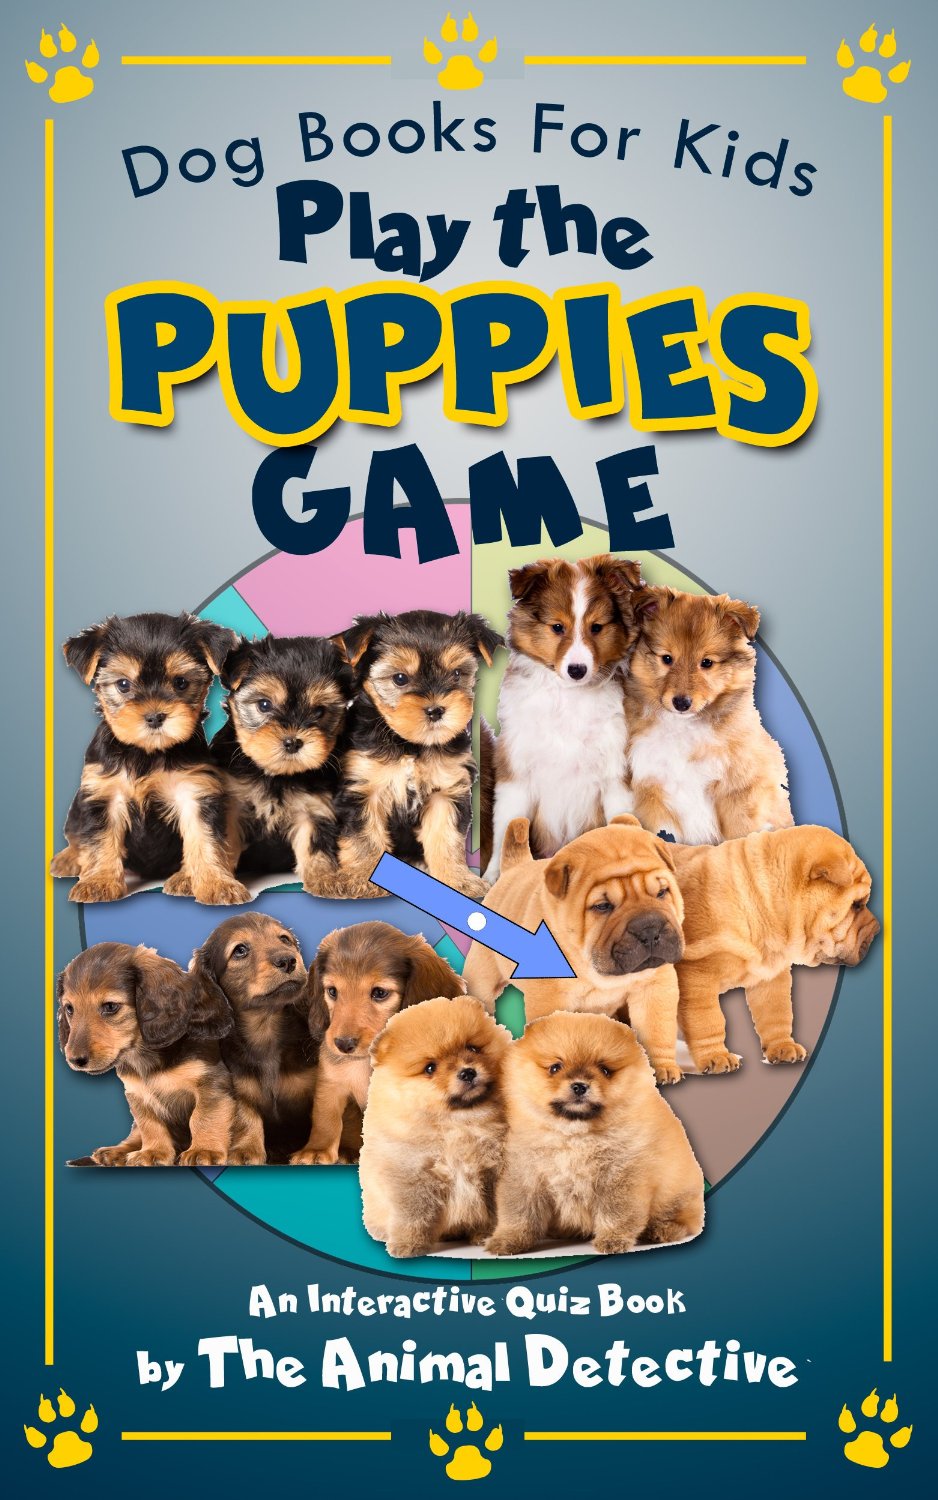 Dog Books For Kids: Play The Puppies Game by Barry Huhn